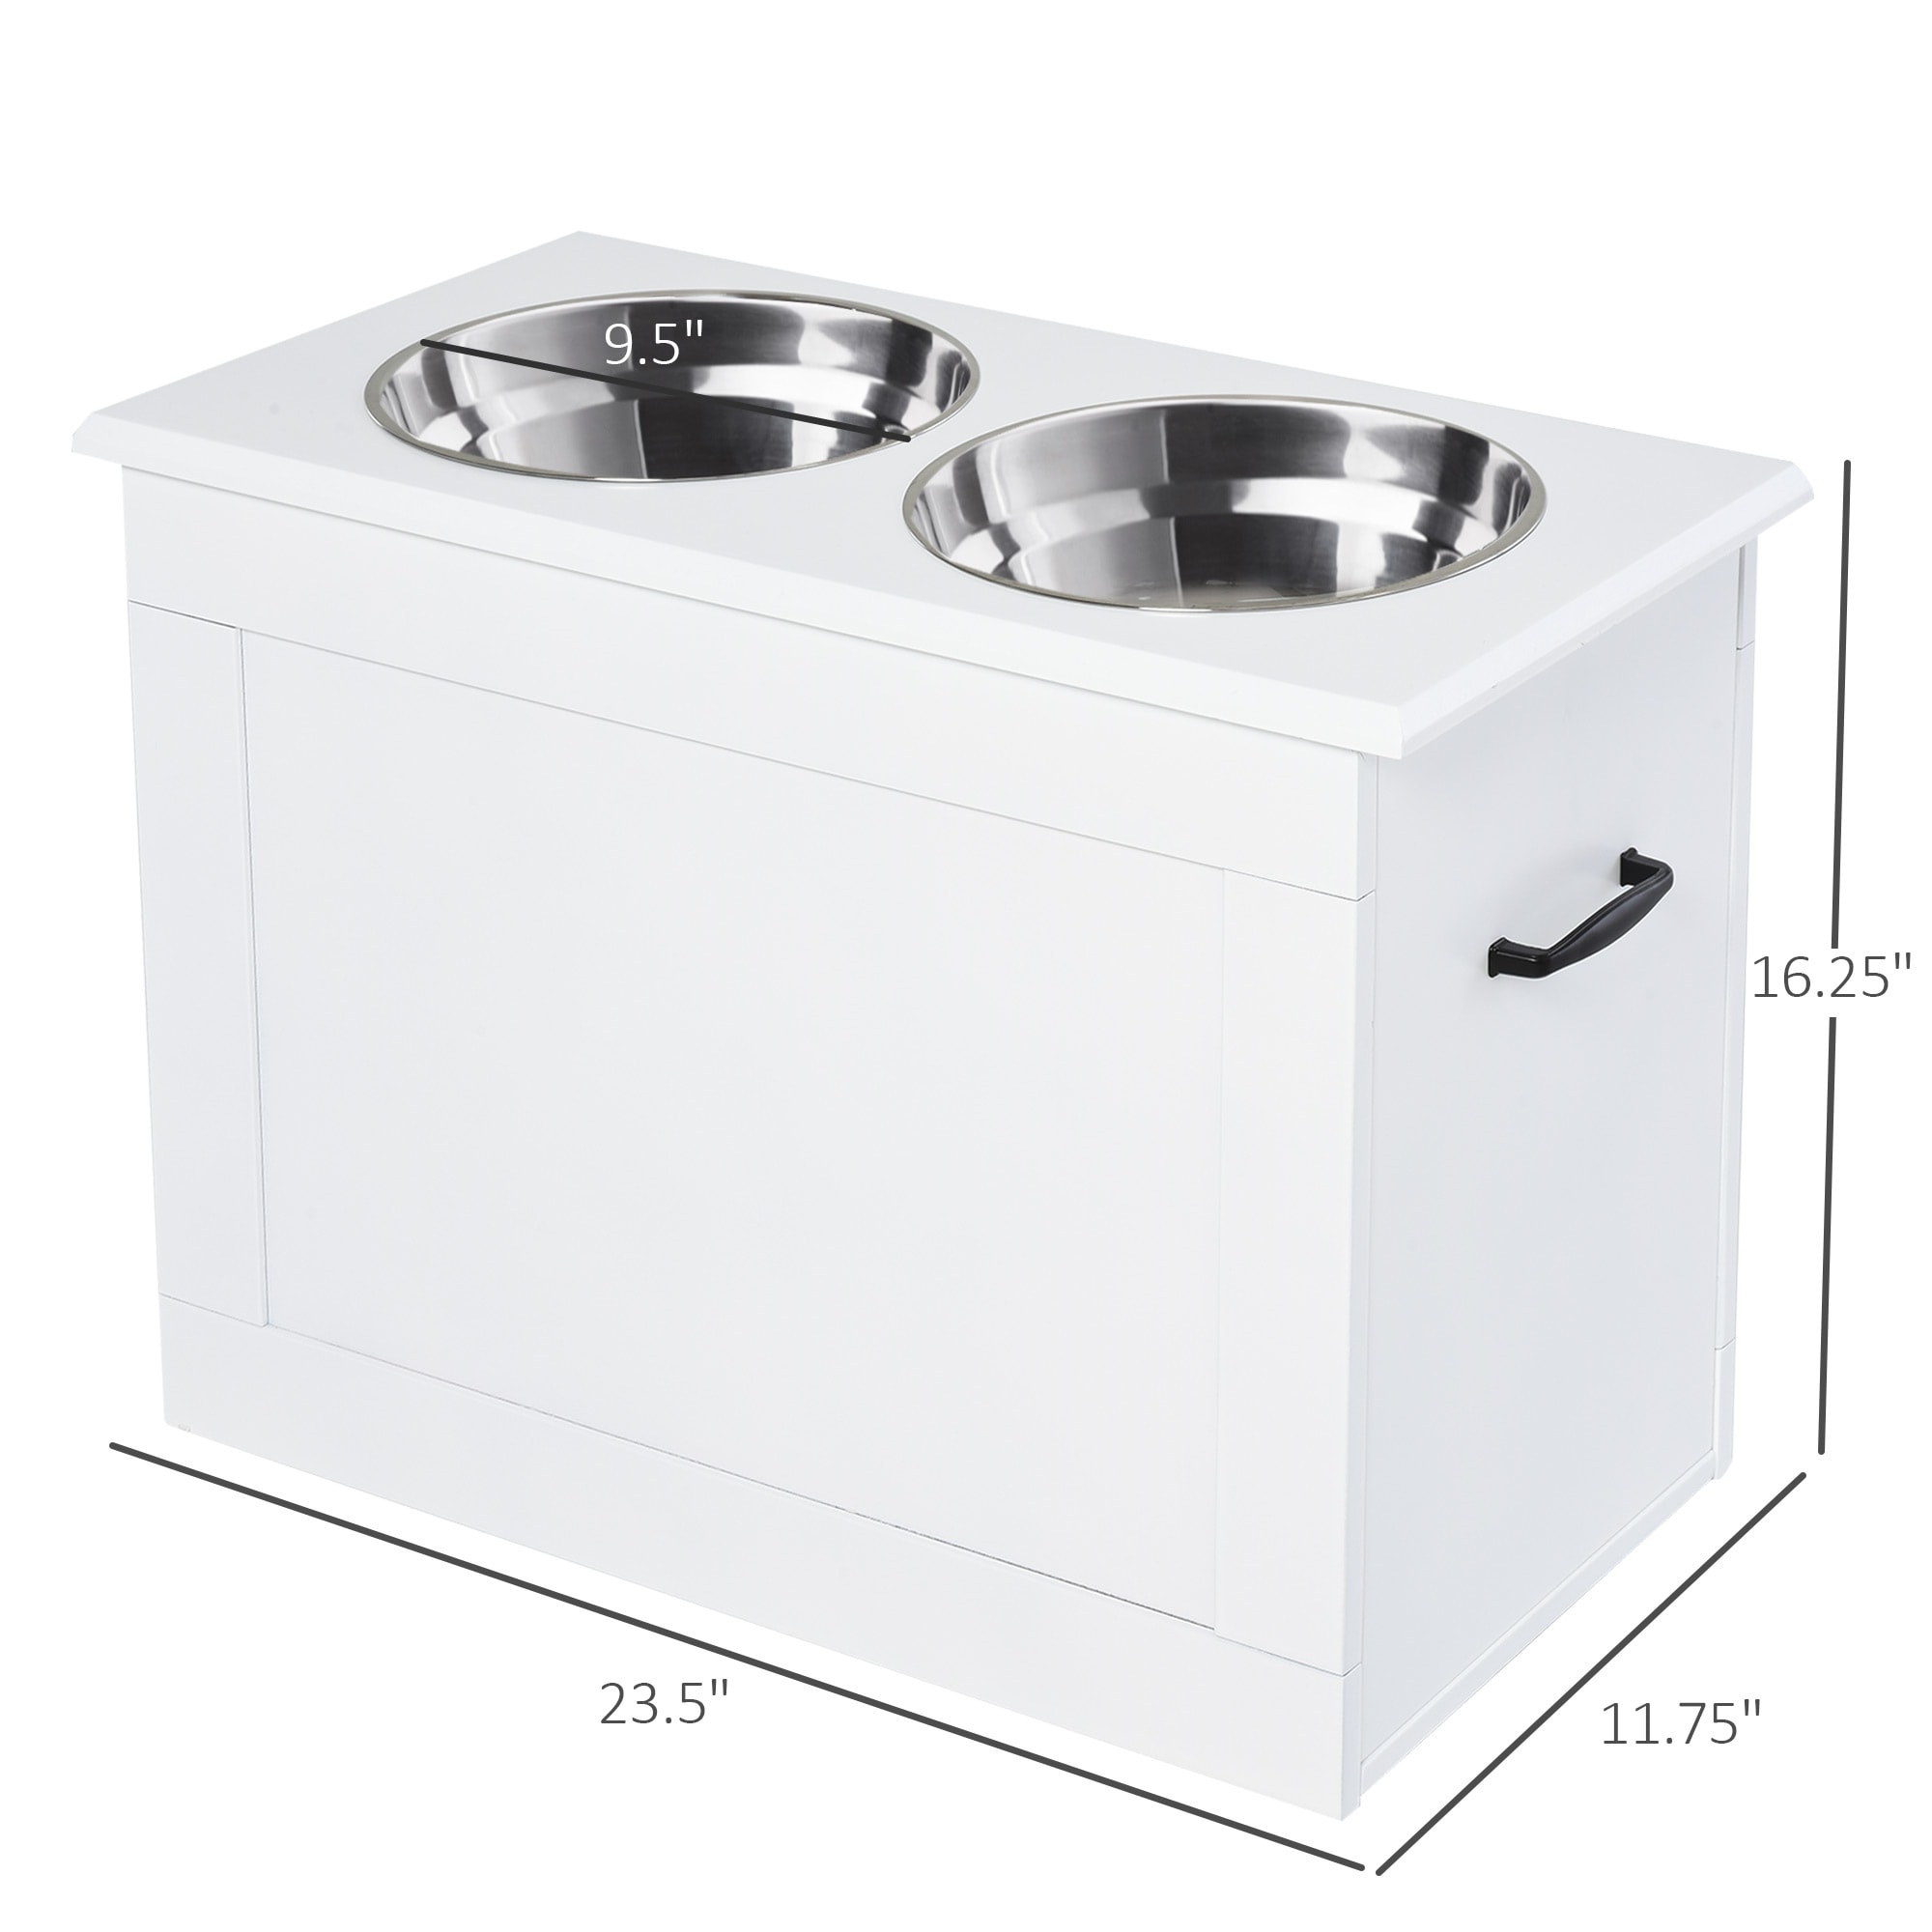 https://ak1.ostkcdn.com/images/products/is/images/direct/4fa6b4bb08bab6d6bc4ef4a88bf4f2bd925206b7/PawHut-Raised-Pet-Feeding-Storage-Station-with-2-Stainless-Steel-Bowls-Base-for-Large-Dogs-and-Other-Large-Pets.jpg